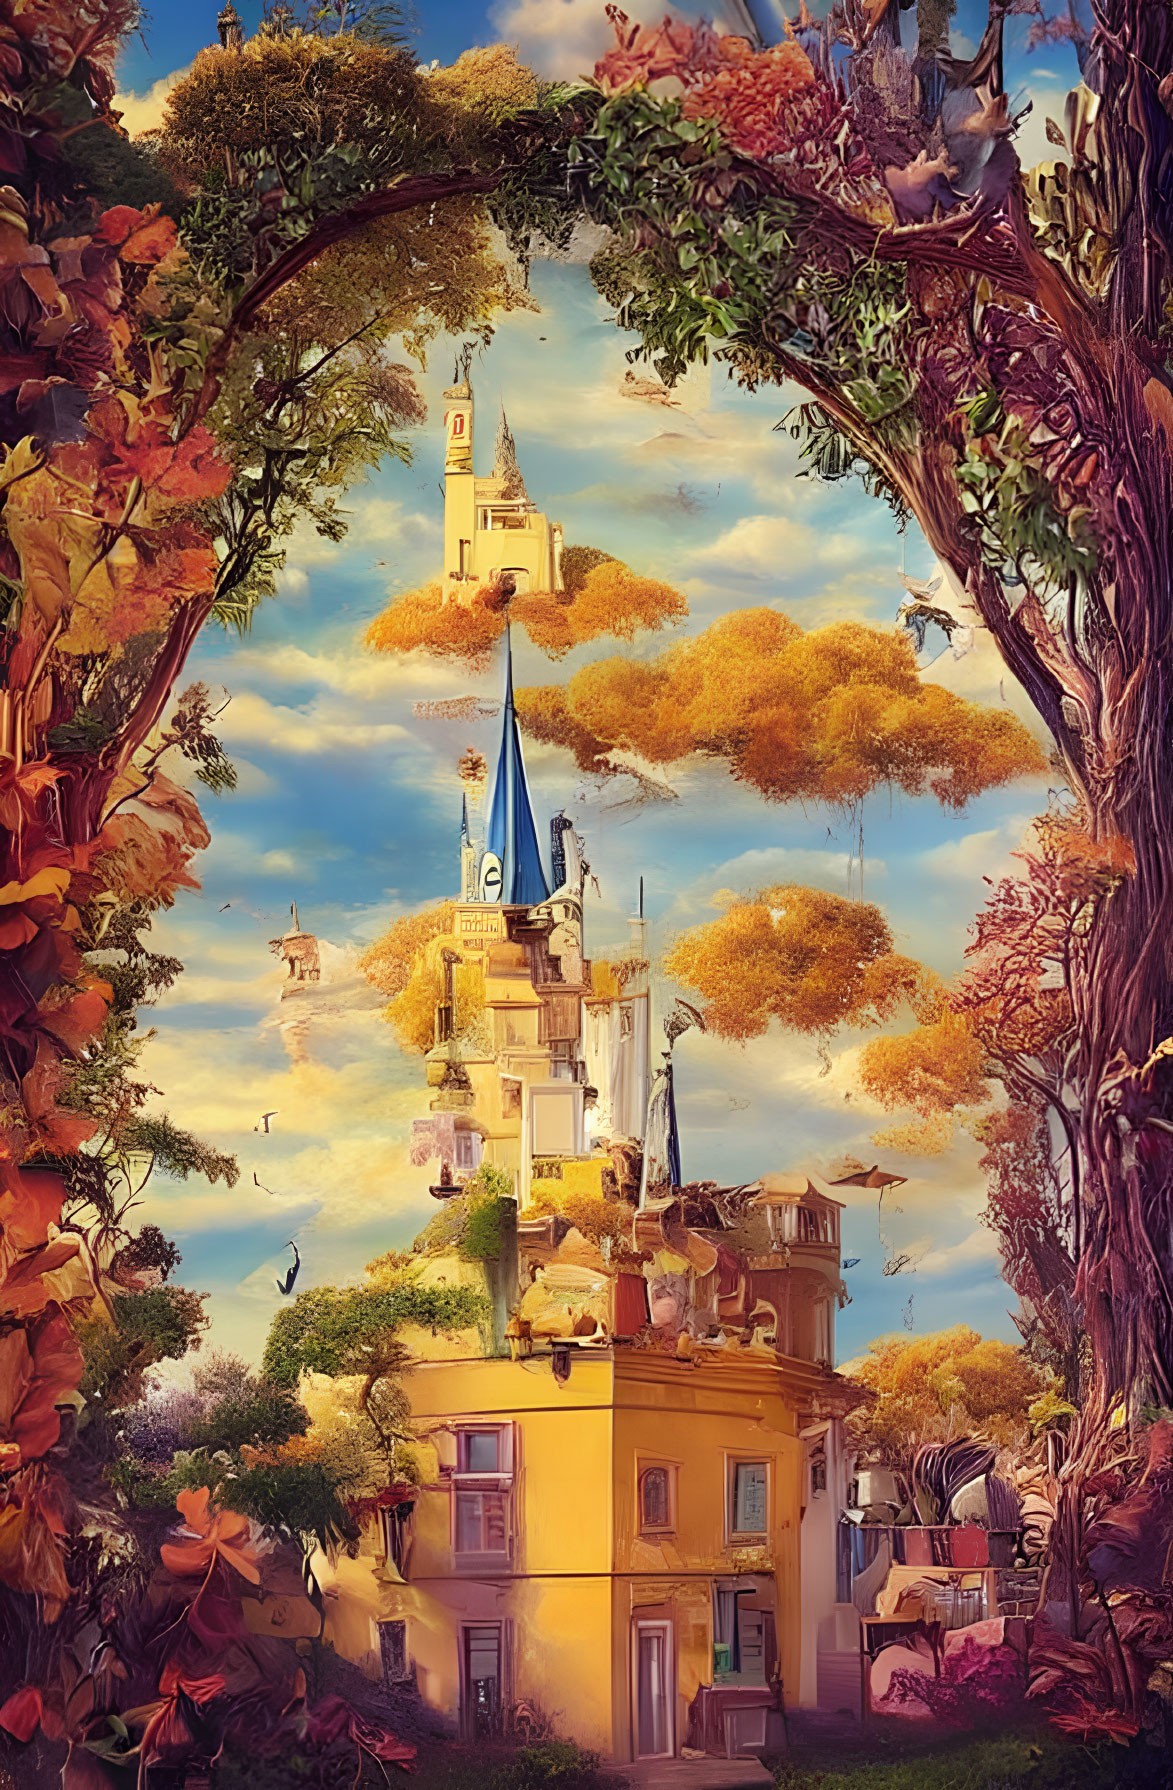 Vibrant yellow castle in whimsical fantasy landscape